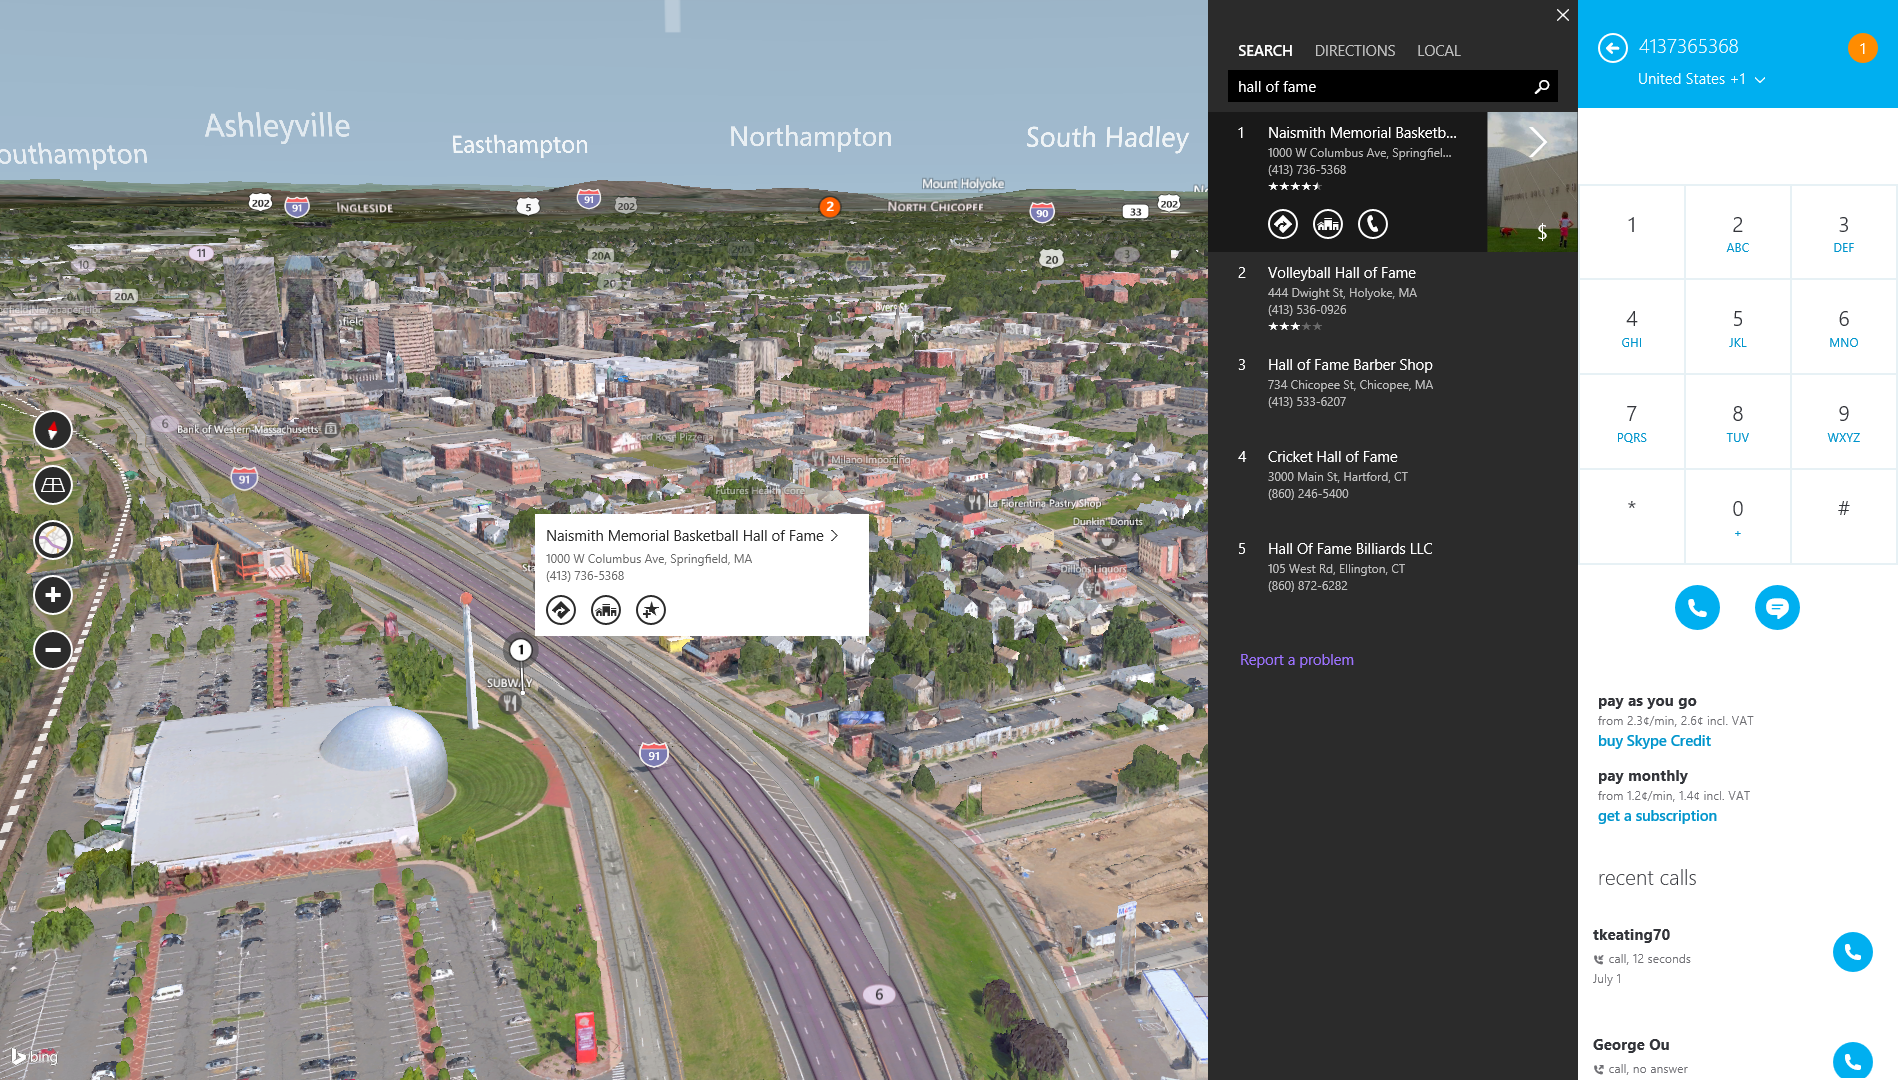 Bing Maps Adds 3D imagery and Skype Integration